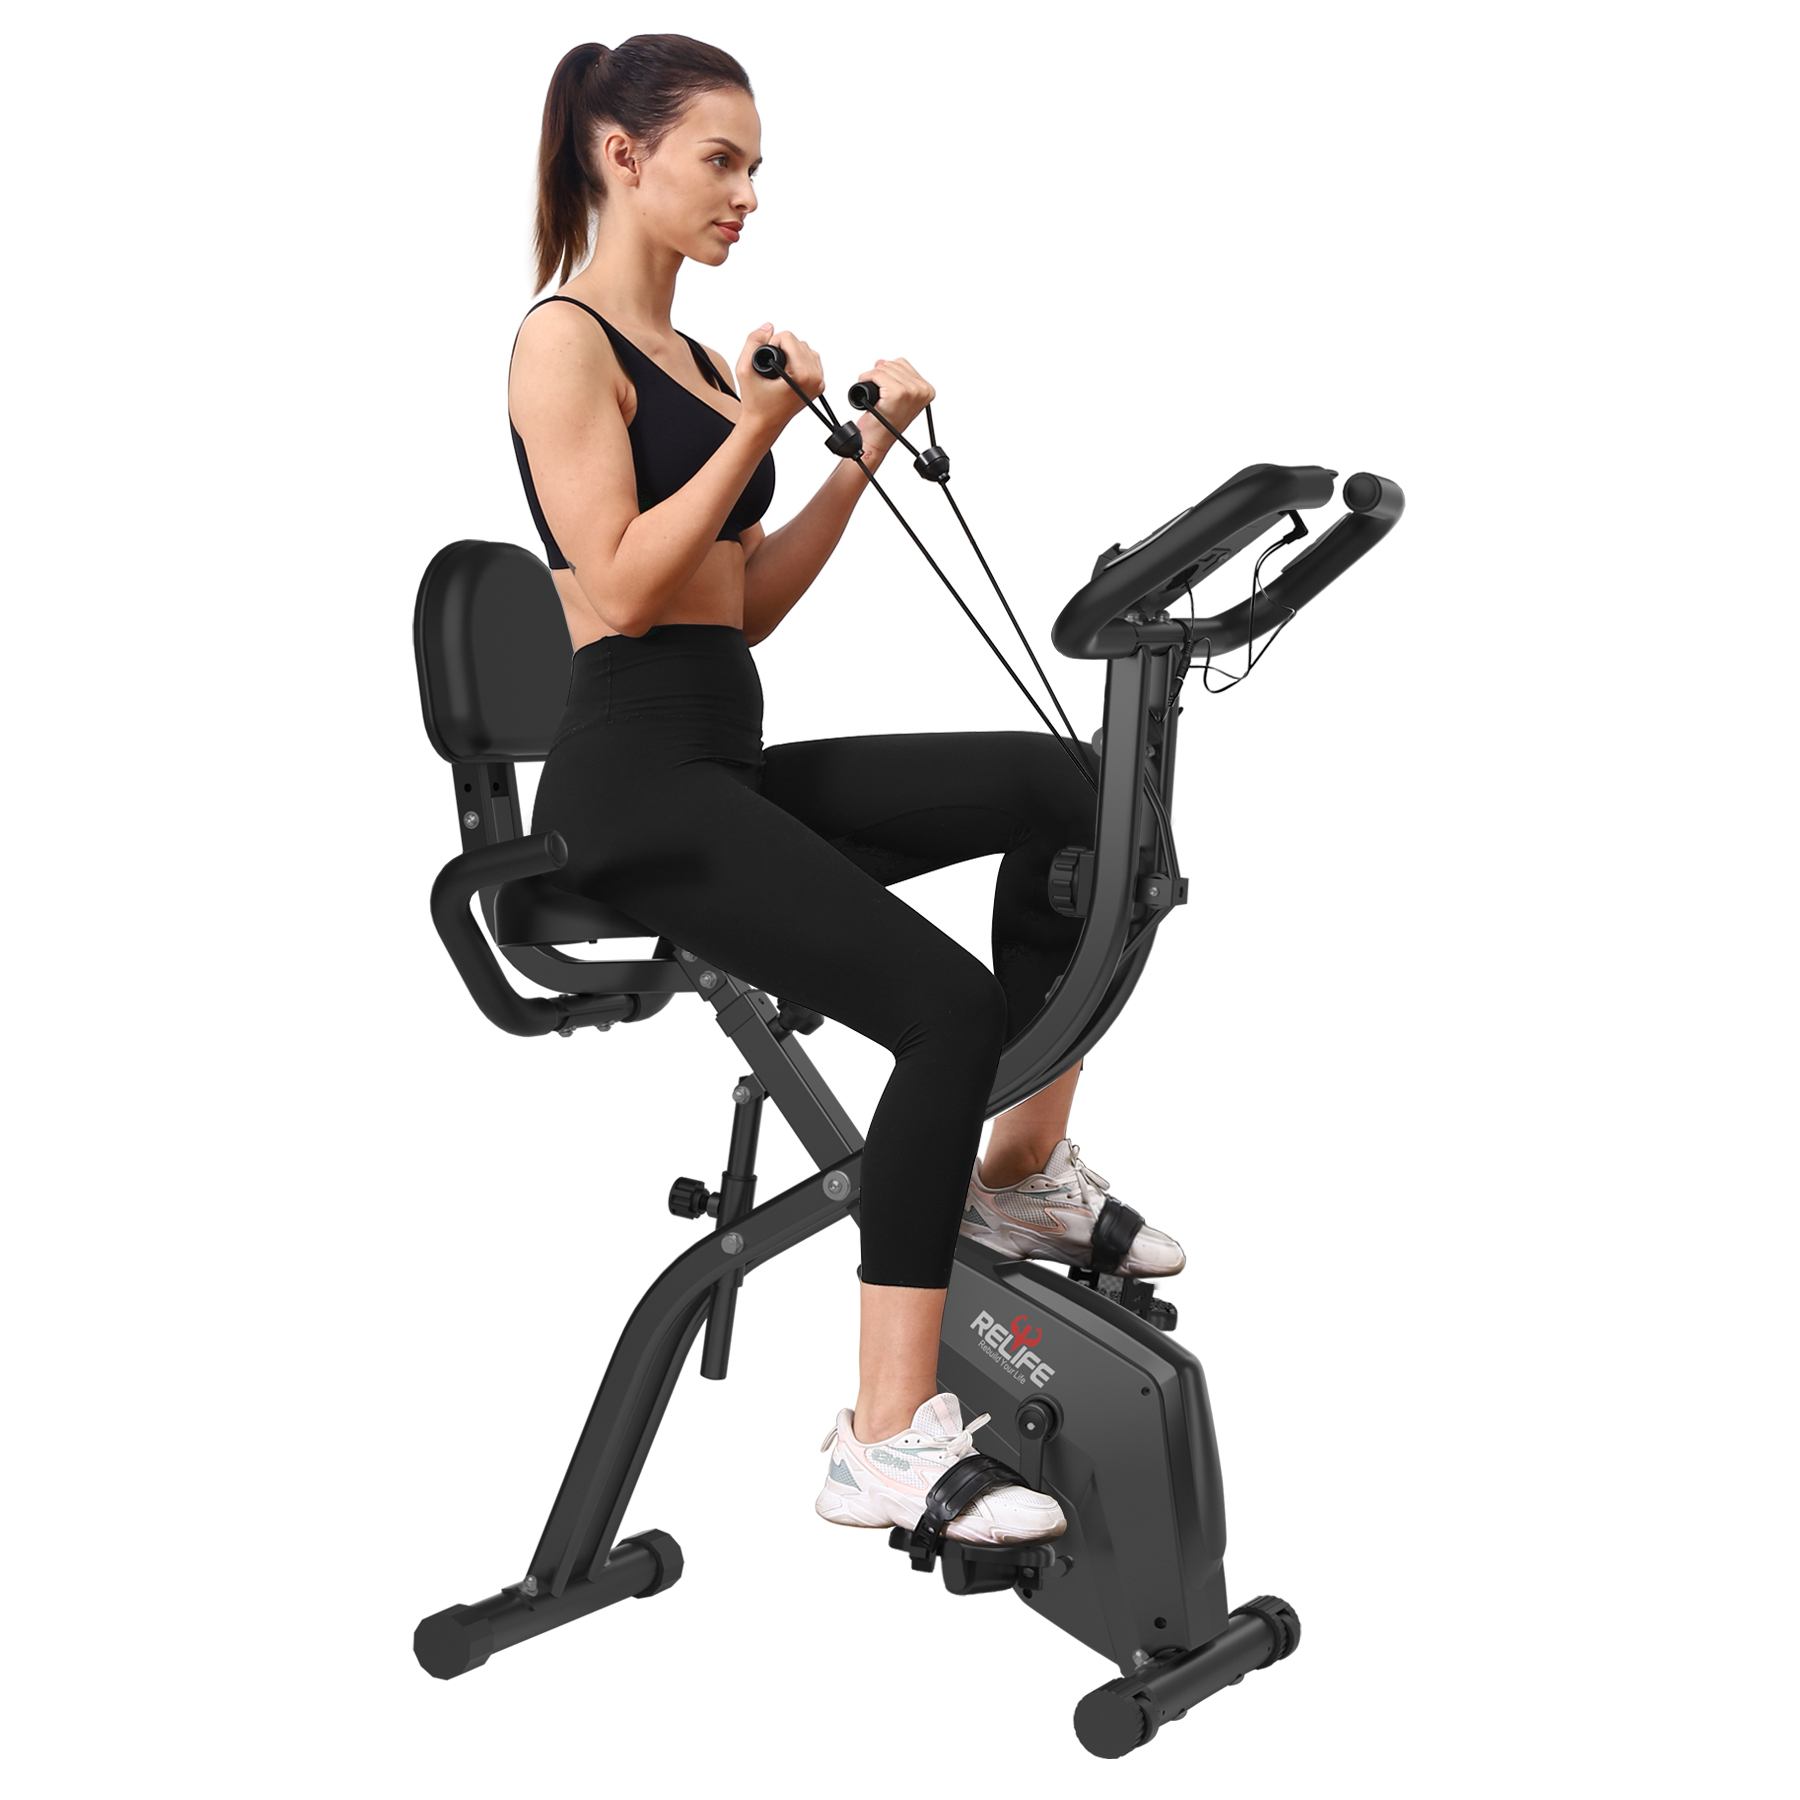 3in1 Foldable Exercise Bike Stationary Bikes for Home Indoor Cycling Bicycles Fitness Cardio Workout RELIFE REBUILD YOUR LIFE - image 1 of 9